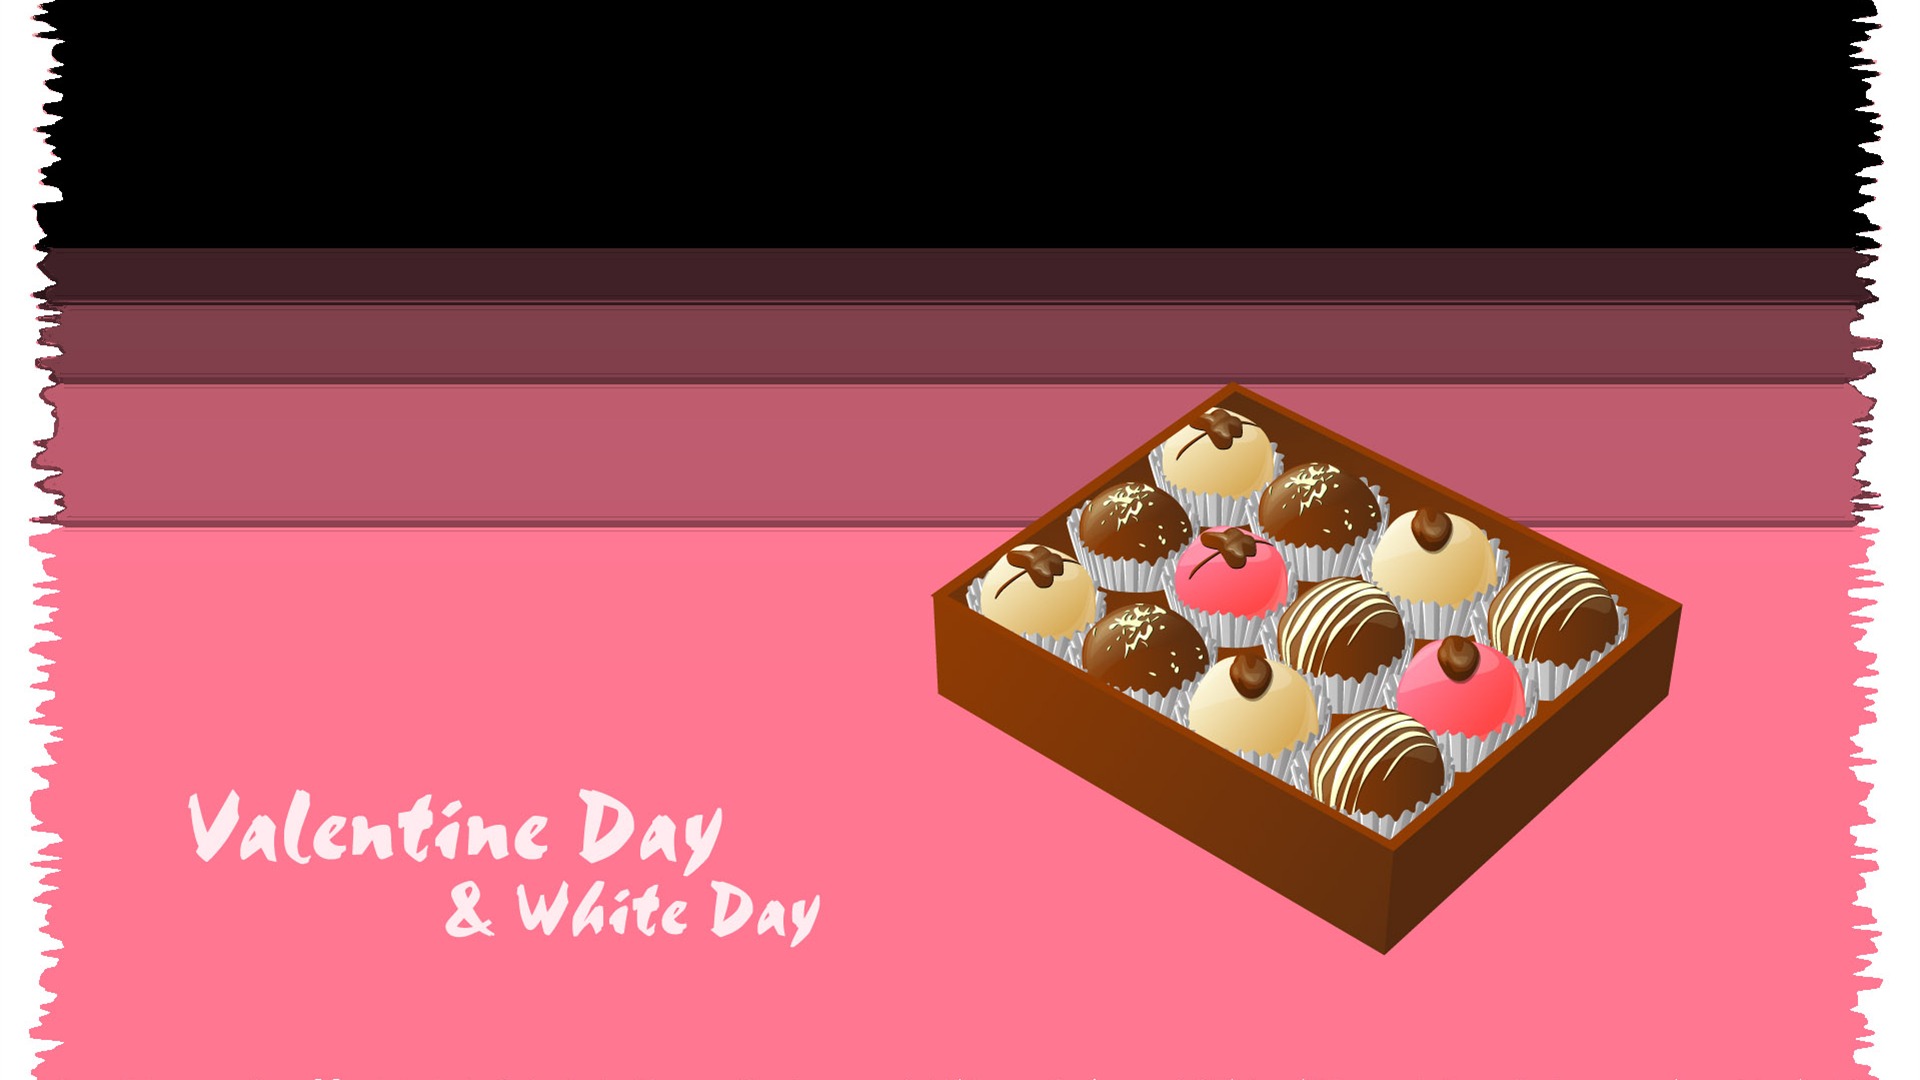 Valentine's Day Theme Wallpapers (1) #9 - 1920x1080